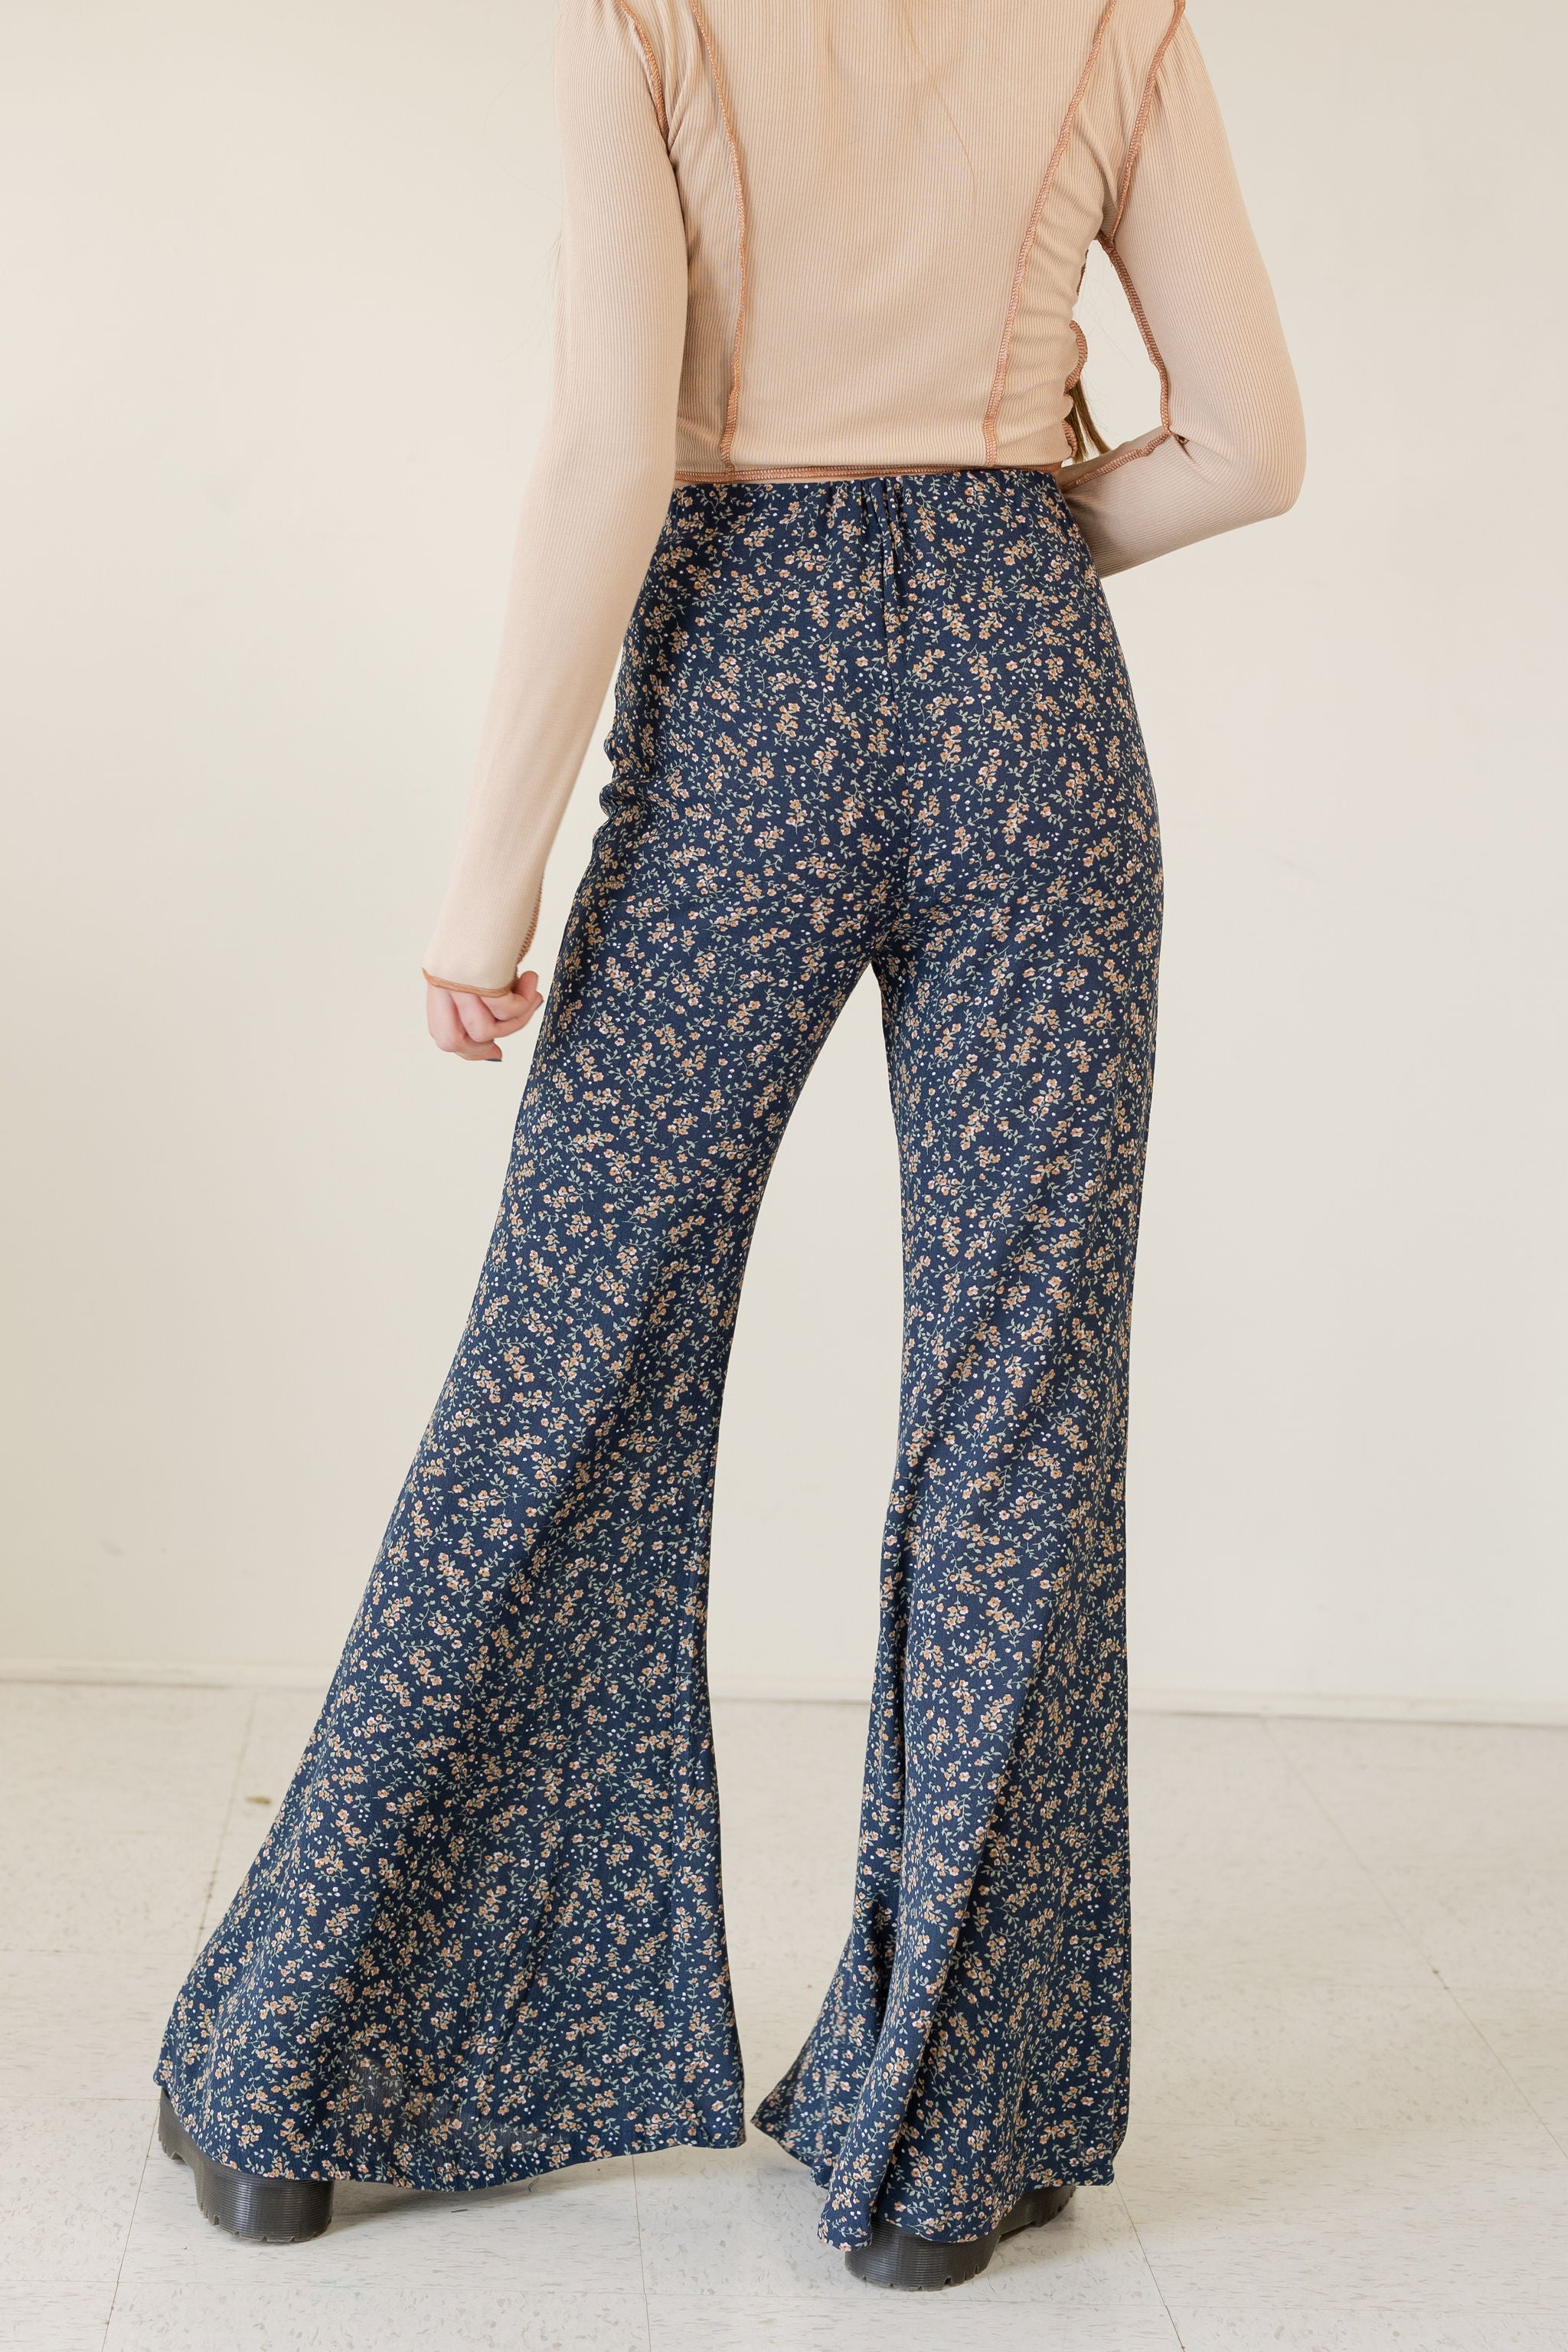 The Careless Floral Flare Pants